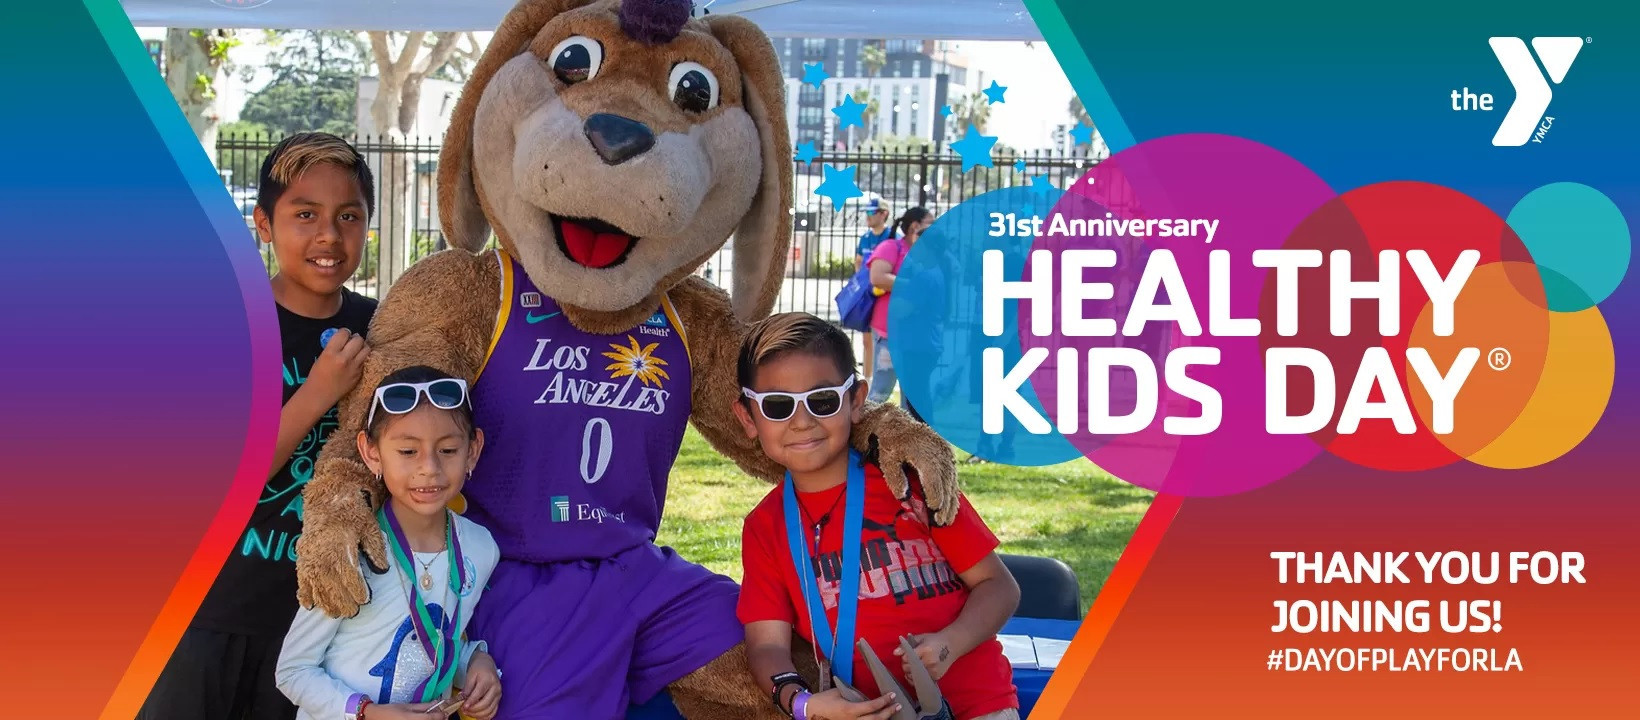 Los Angeles 2028 help promote wellness at Healthy Kids Day event